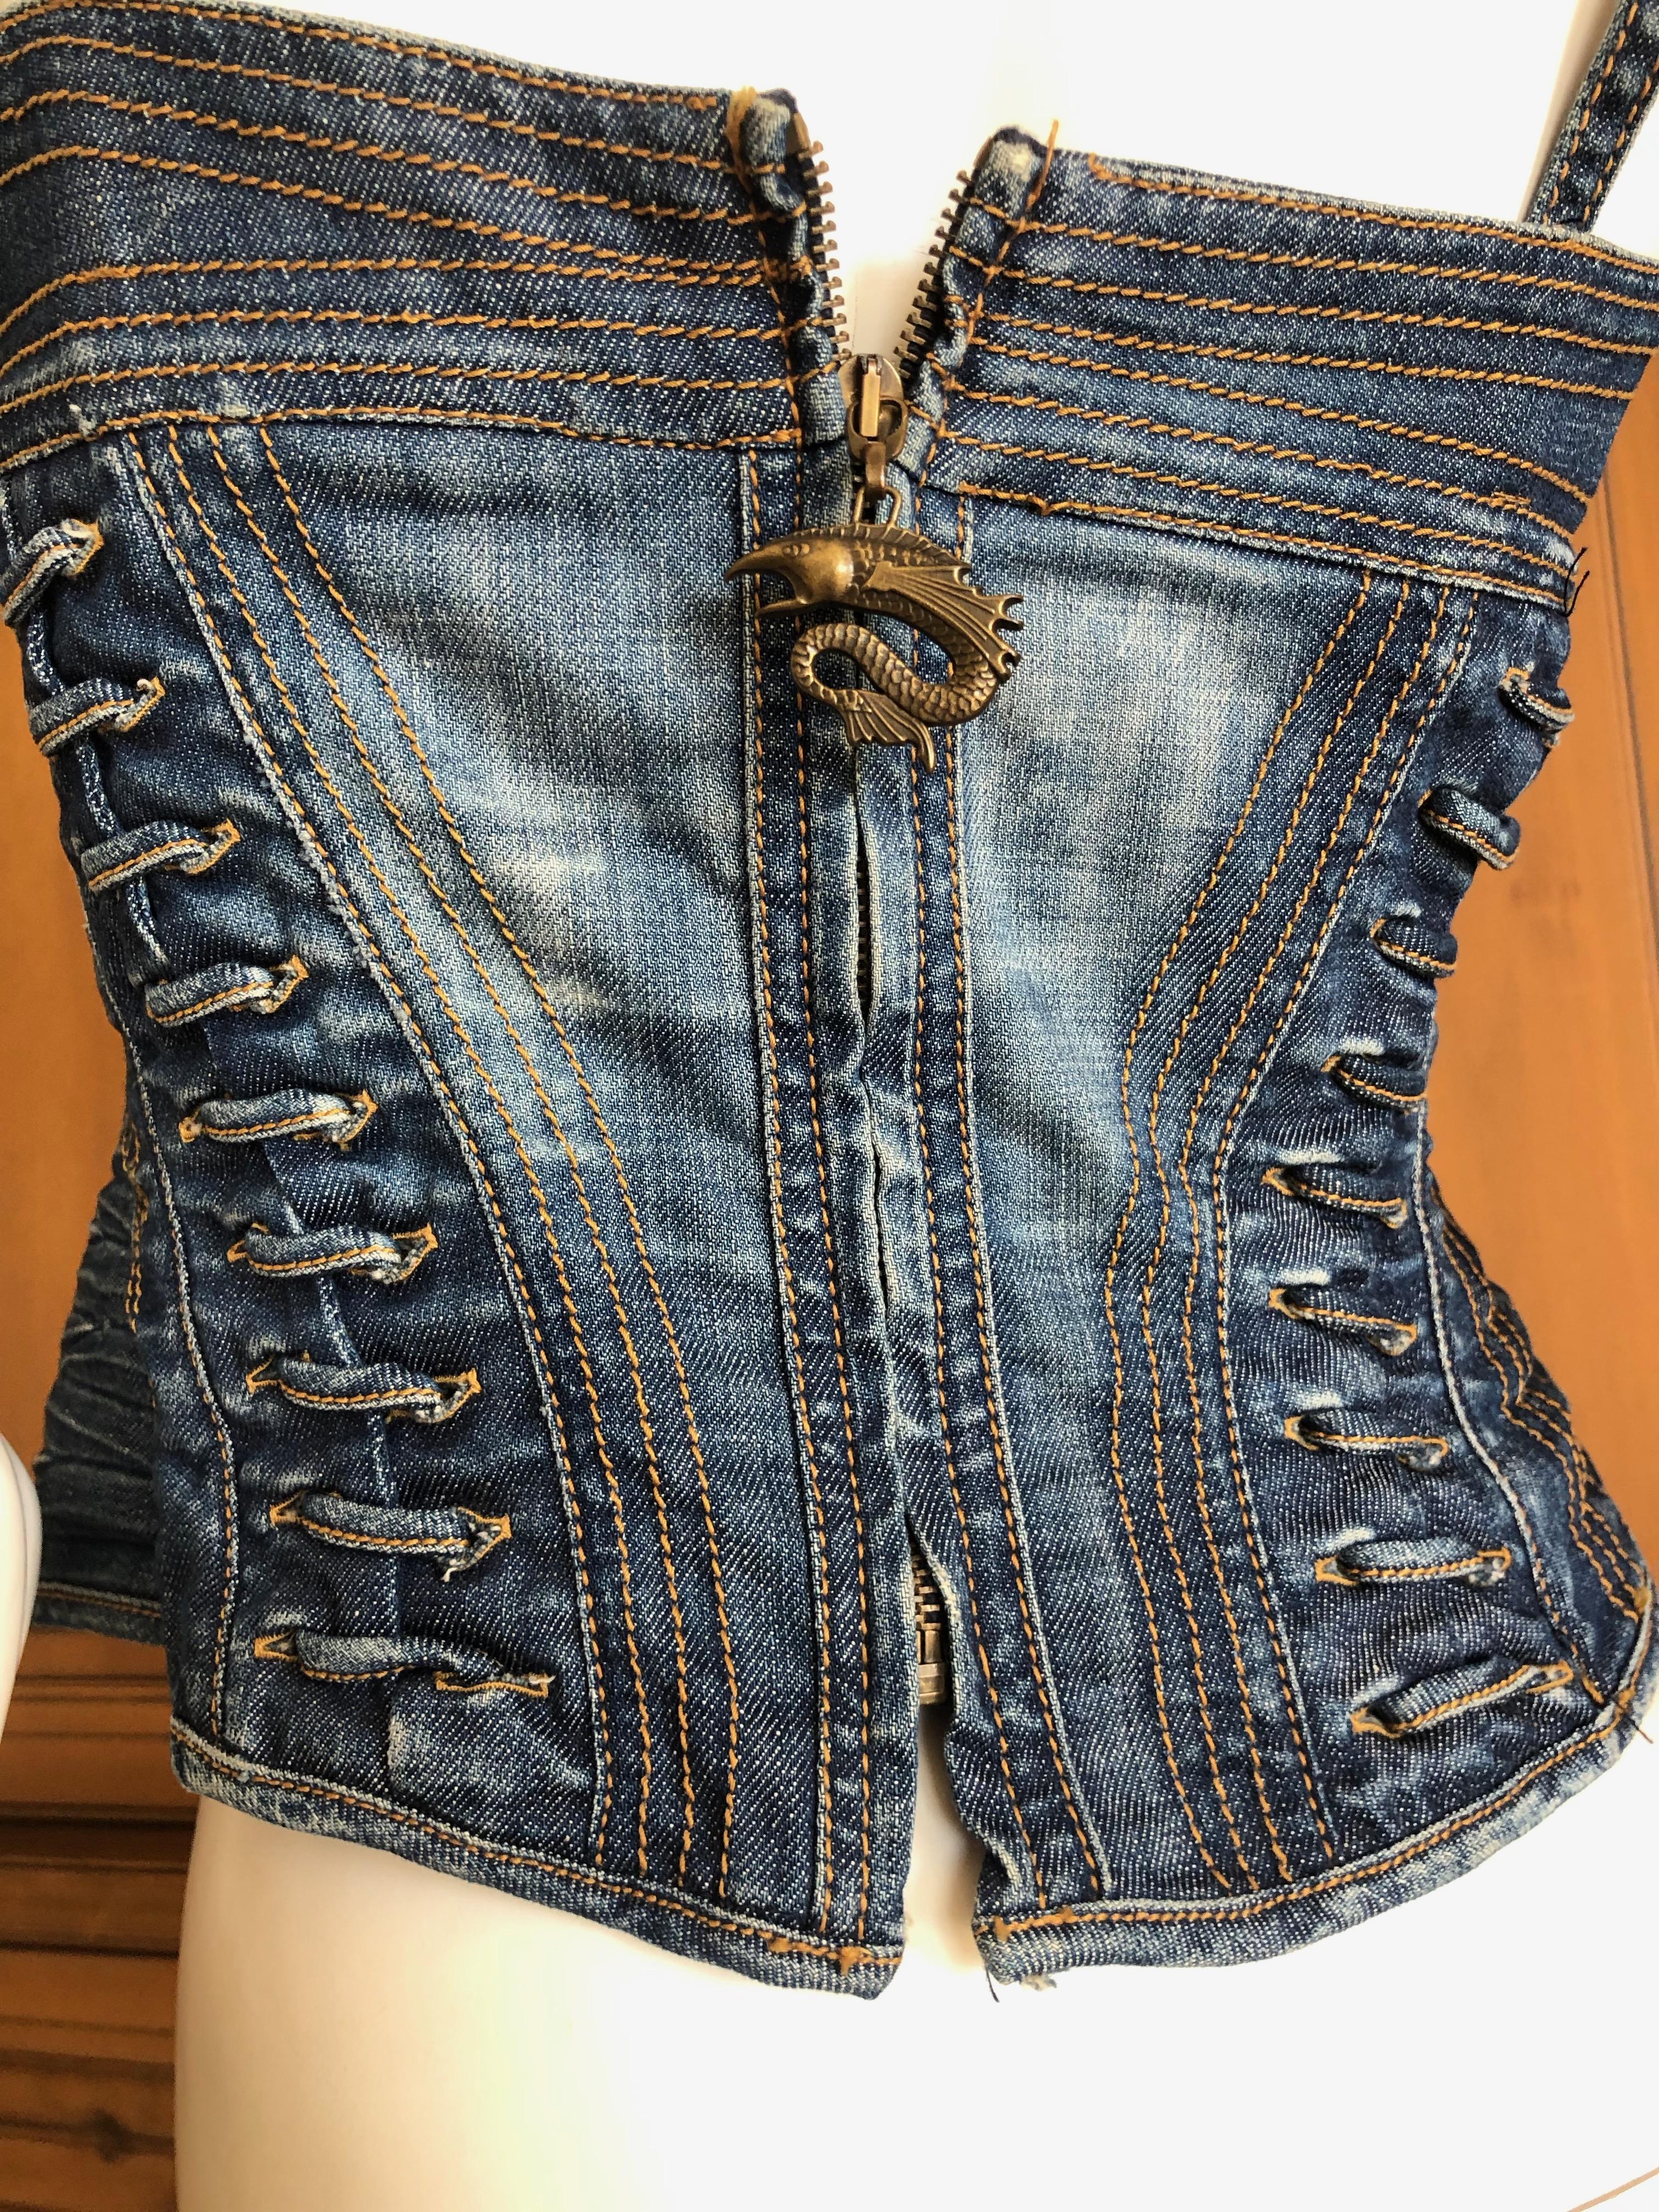 Roberto Cavalli for Just Cavalli Denim Corset with Lace Up Details New Tags 1